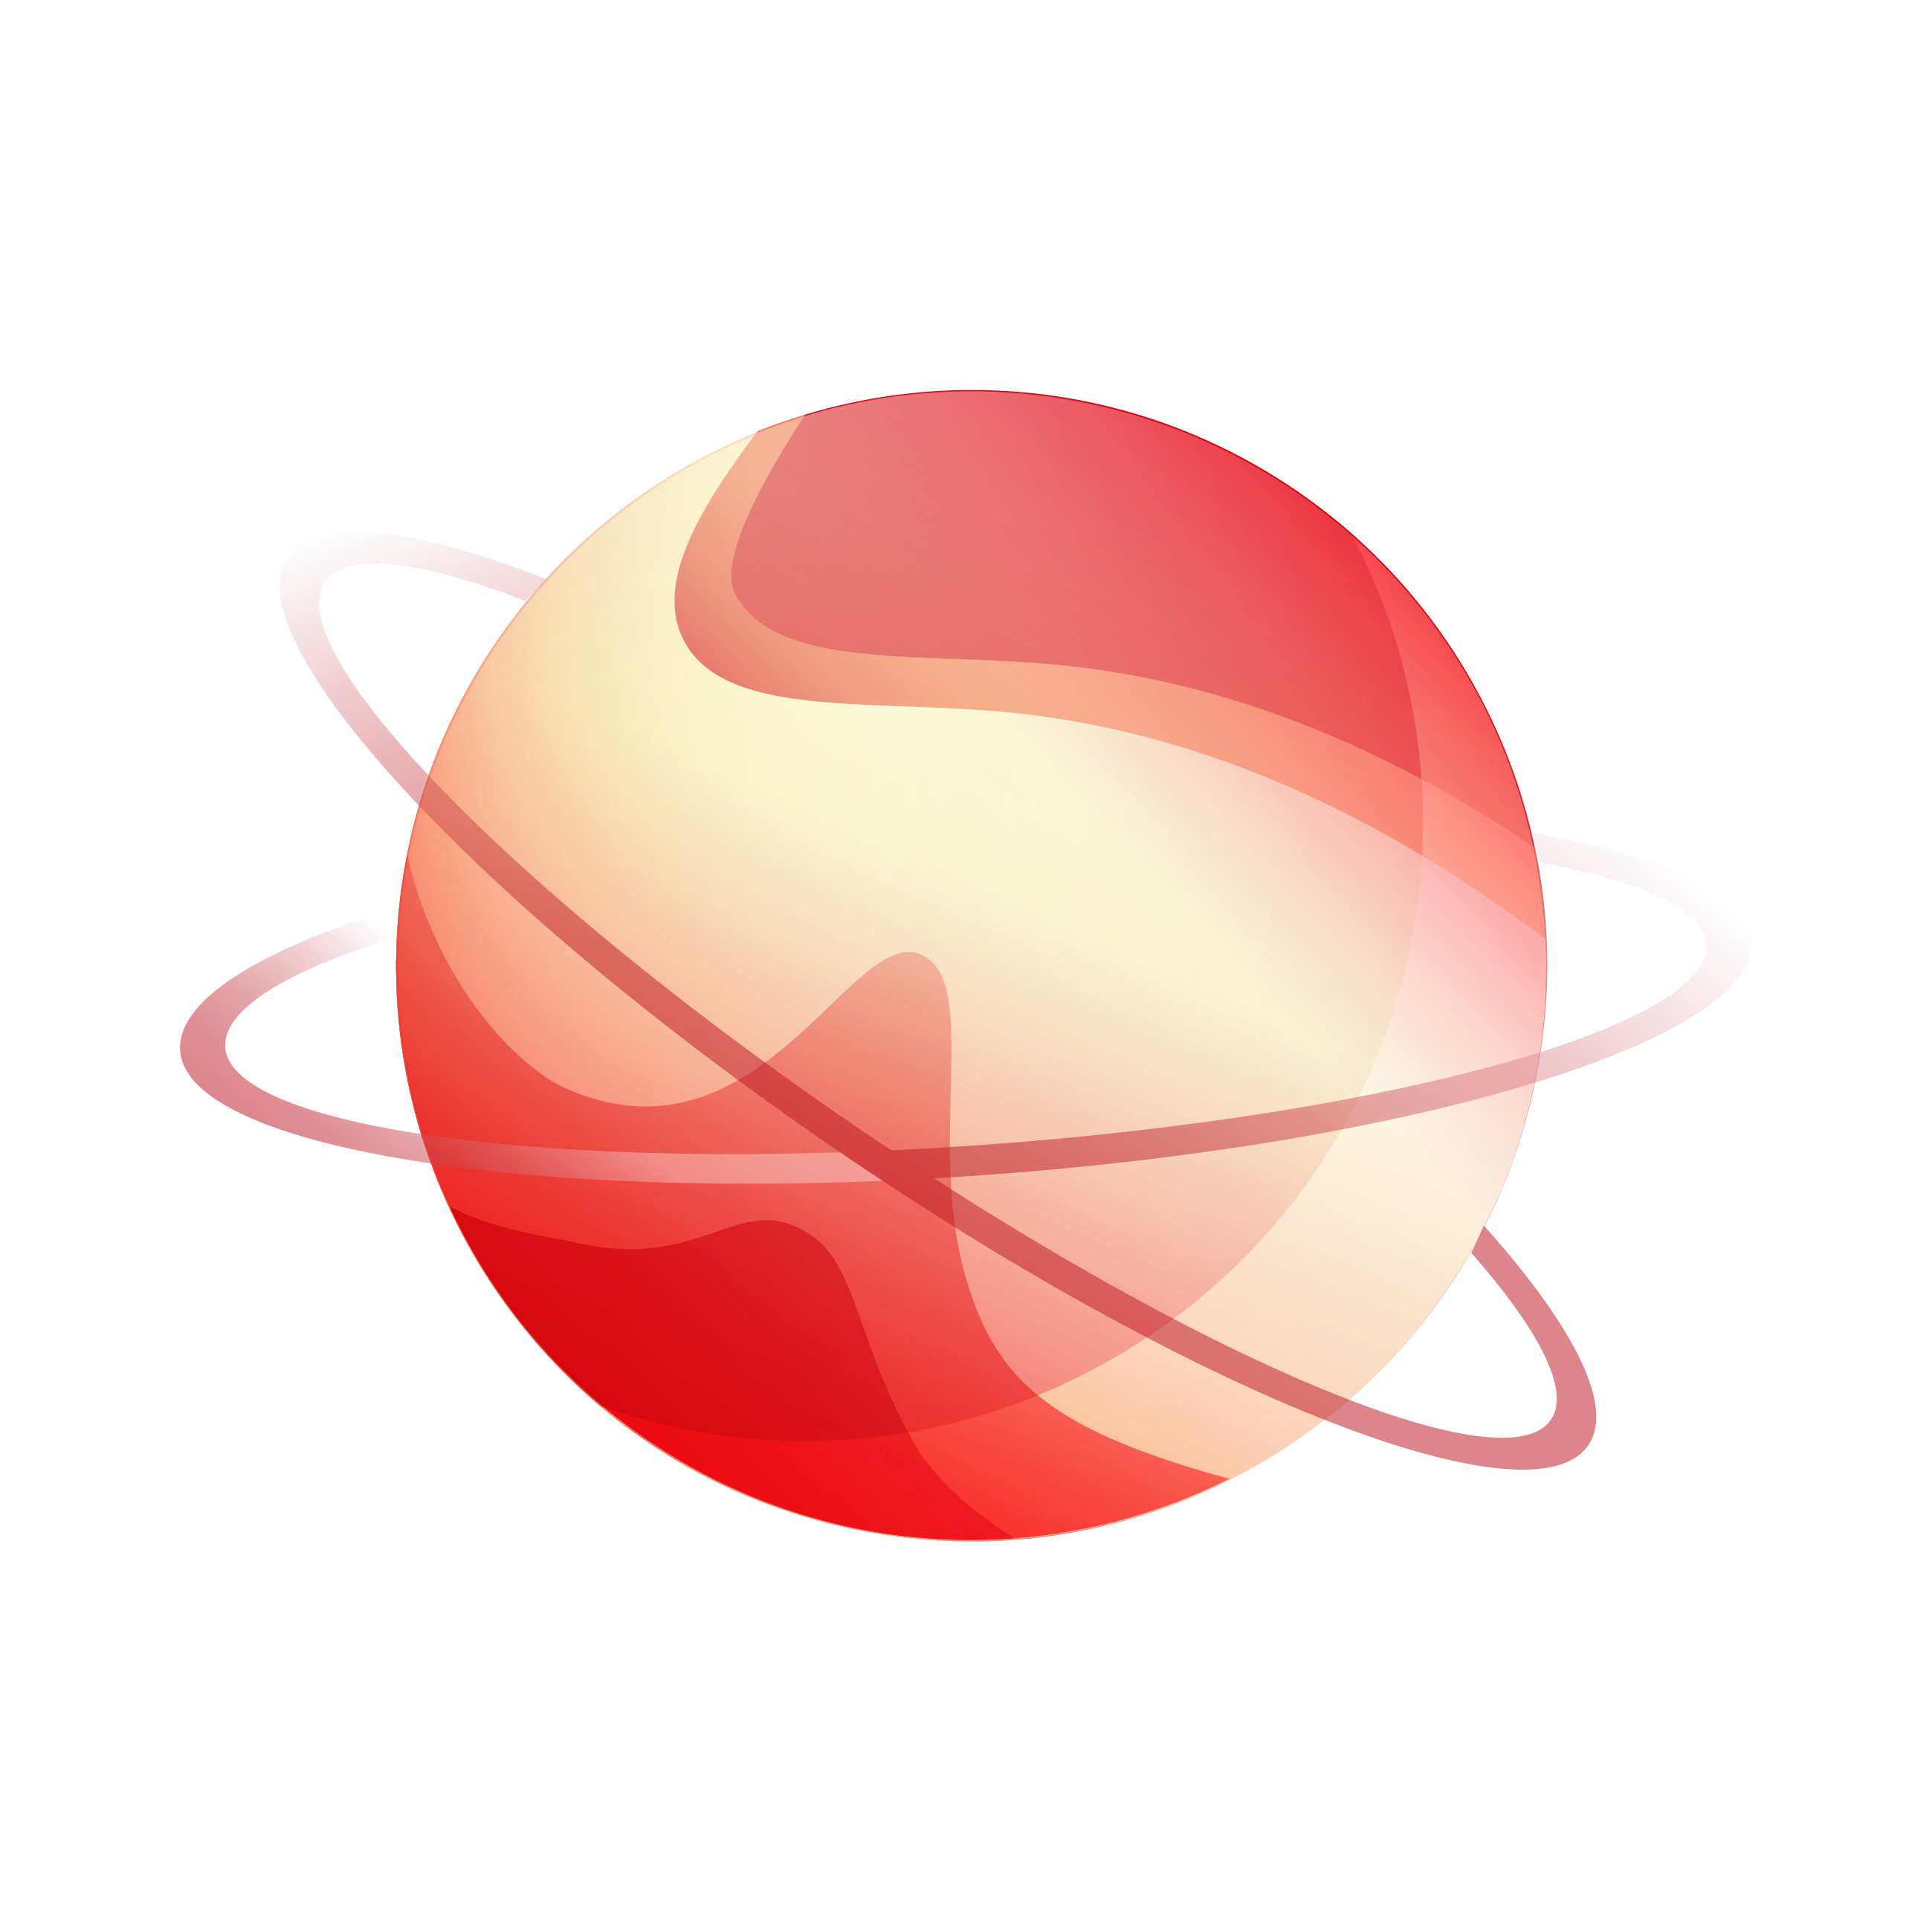 Red Ball, Software